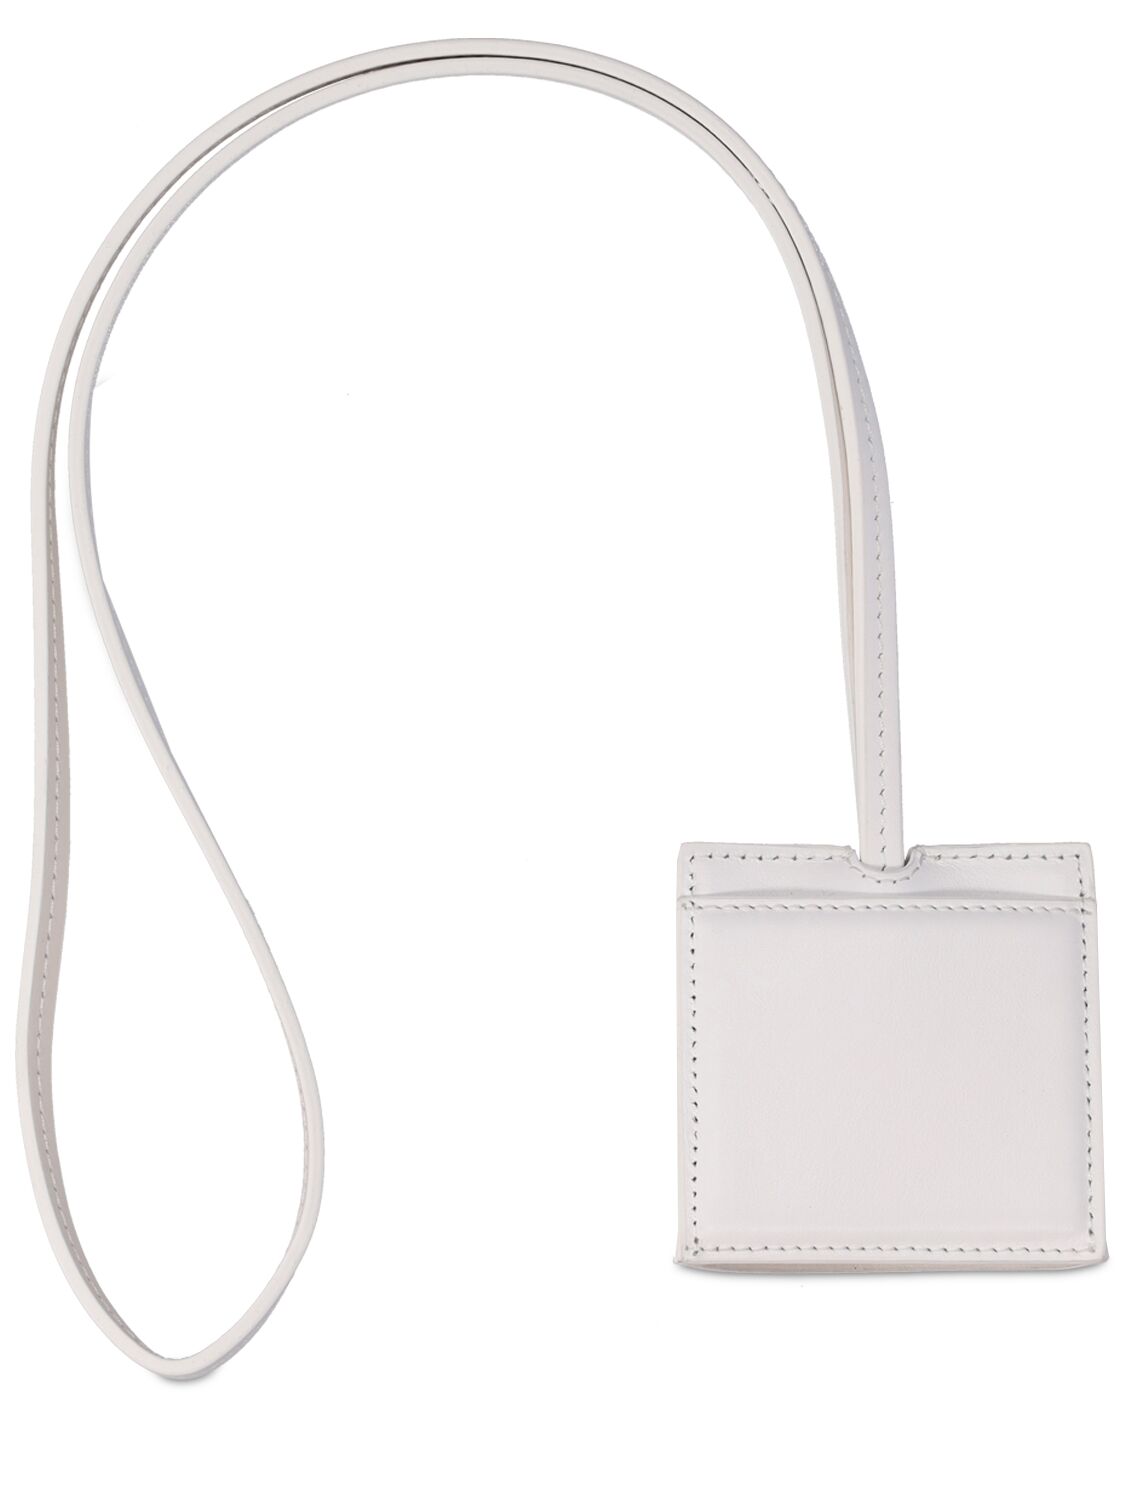 Shop Jacquemus Le Porte Cle Bagage Key Holder In White